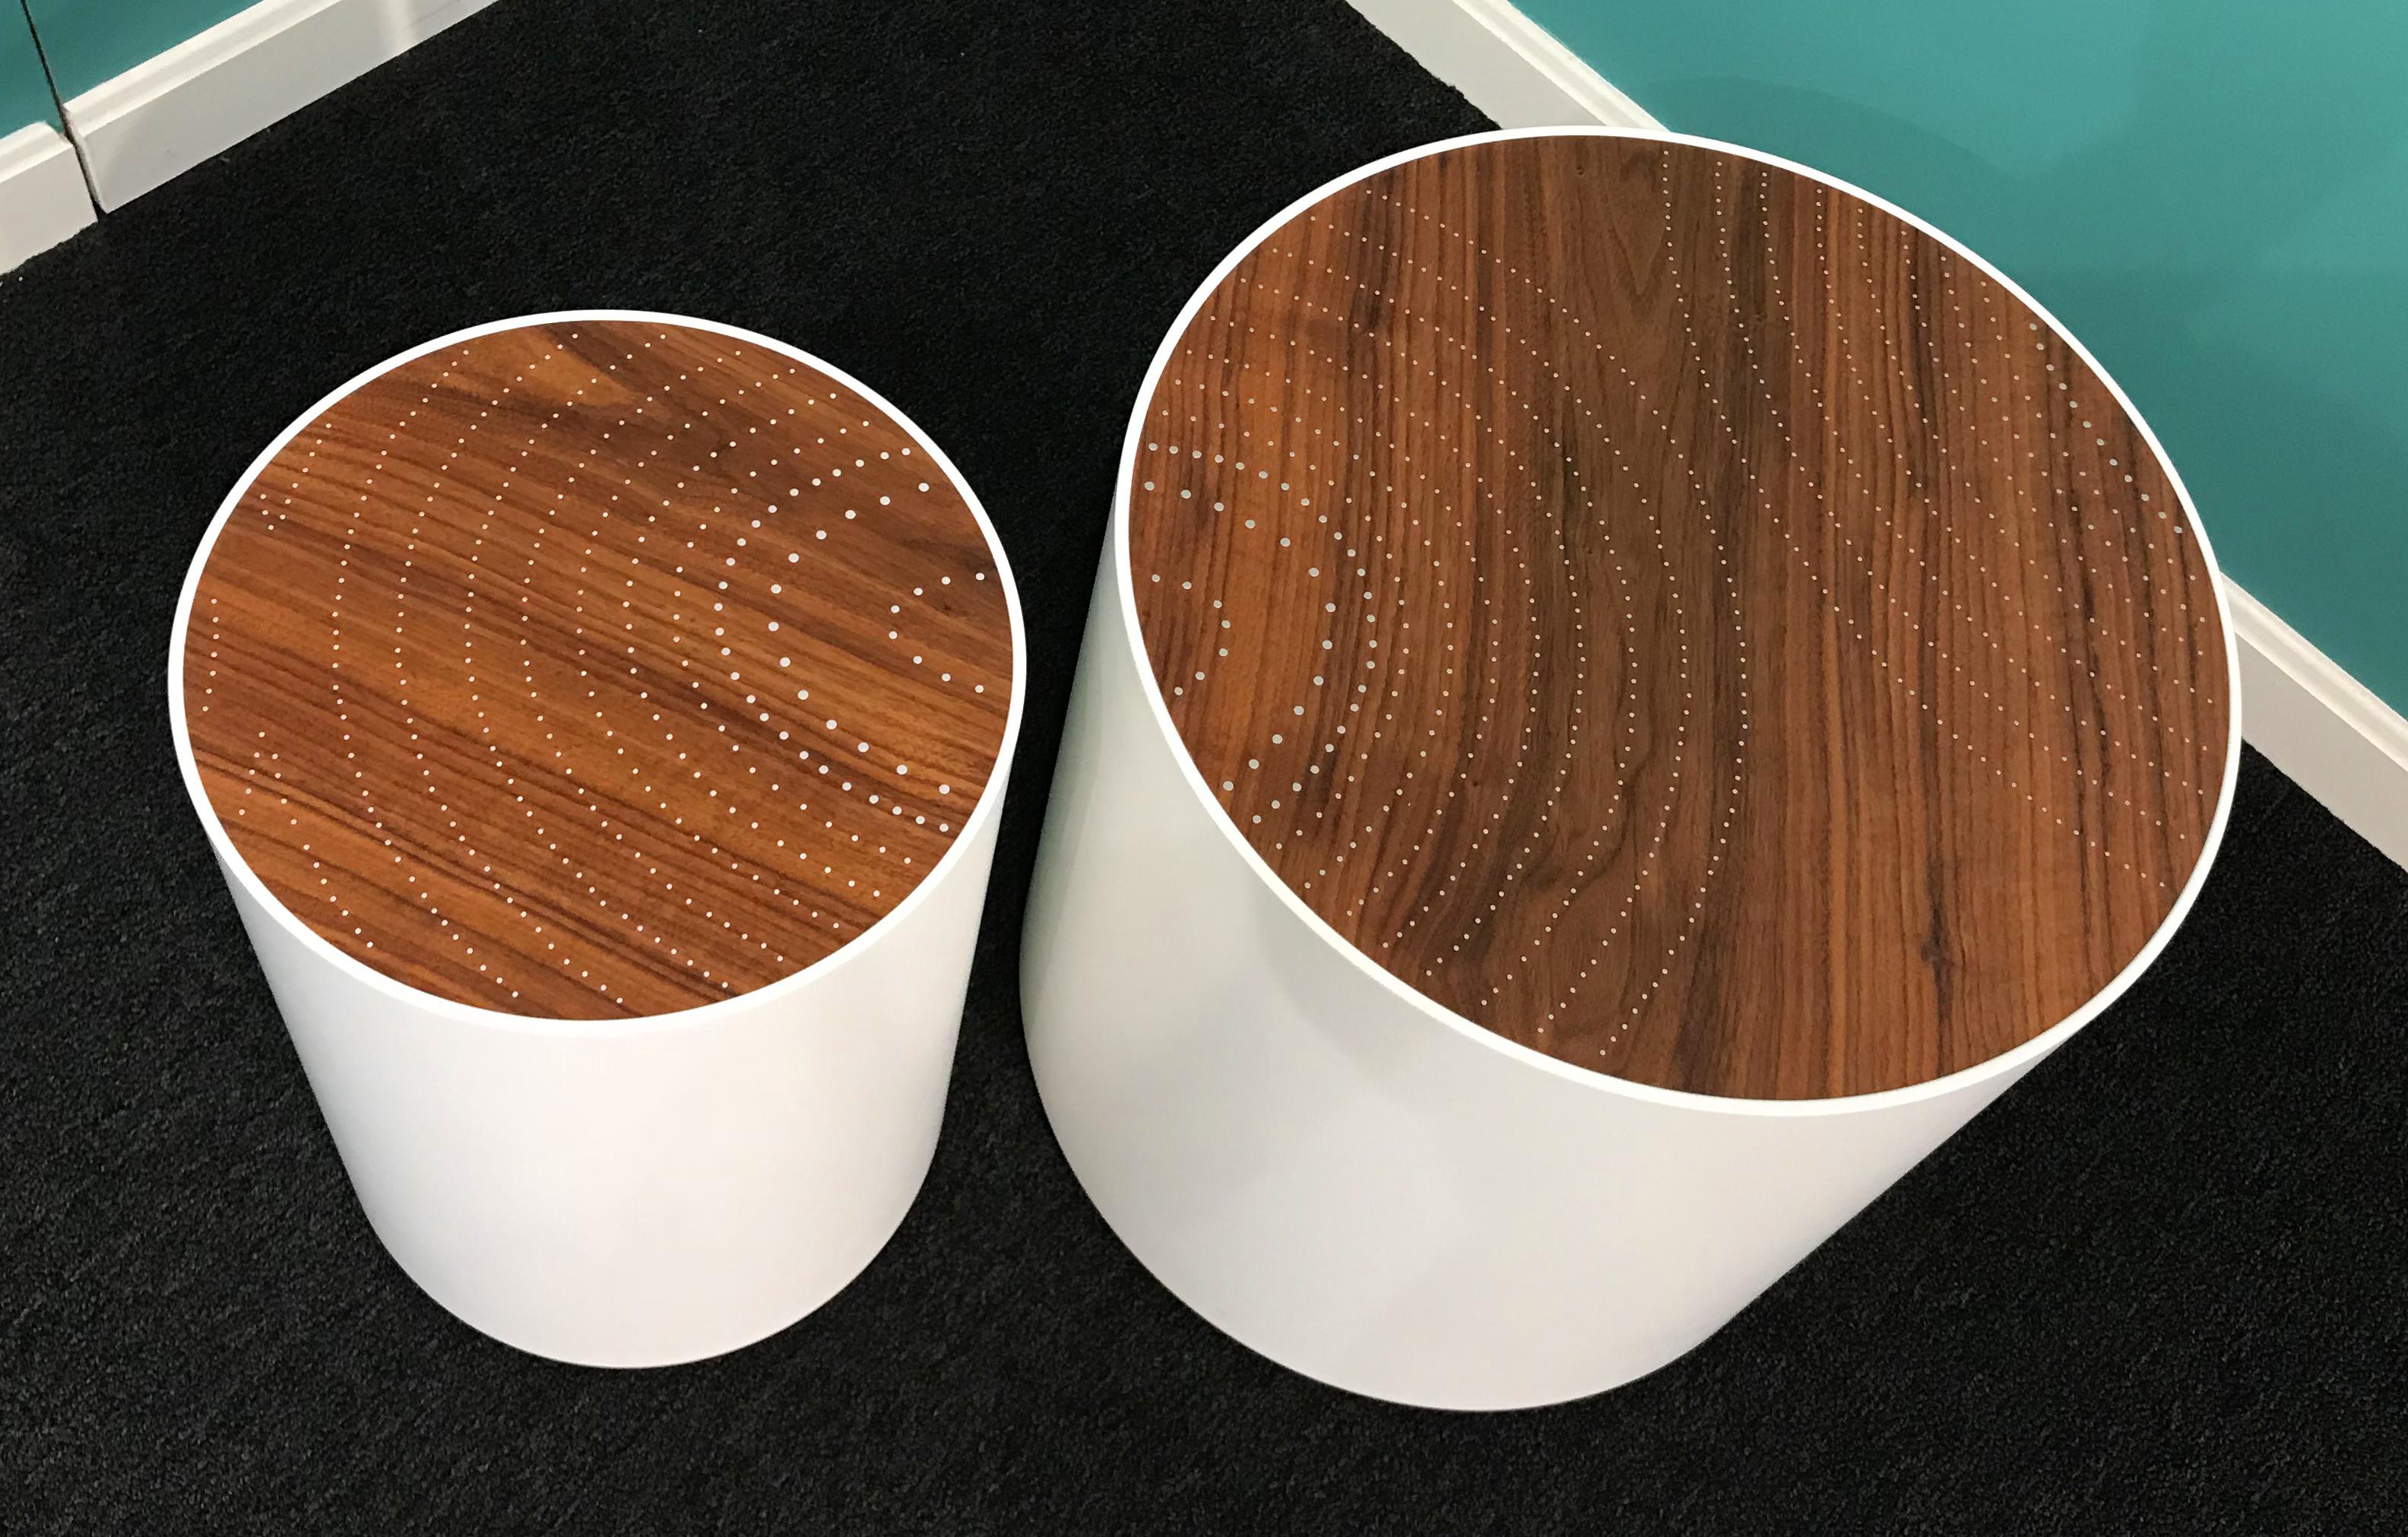 A fine custom modernist set of two drum tables, handcrafted by Peter Sandback. Sandback has gained a national reputation for his intricate pattern work of inlaid nails set into Minimalist handmade tables, benches and other functional forms that he